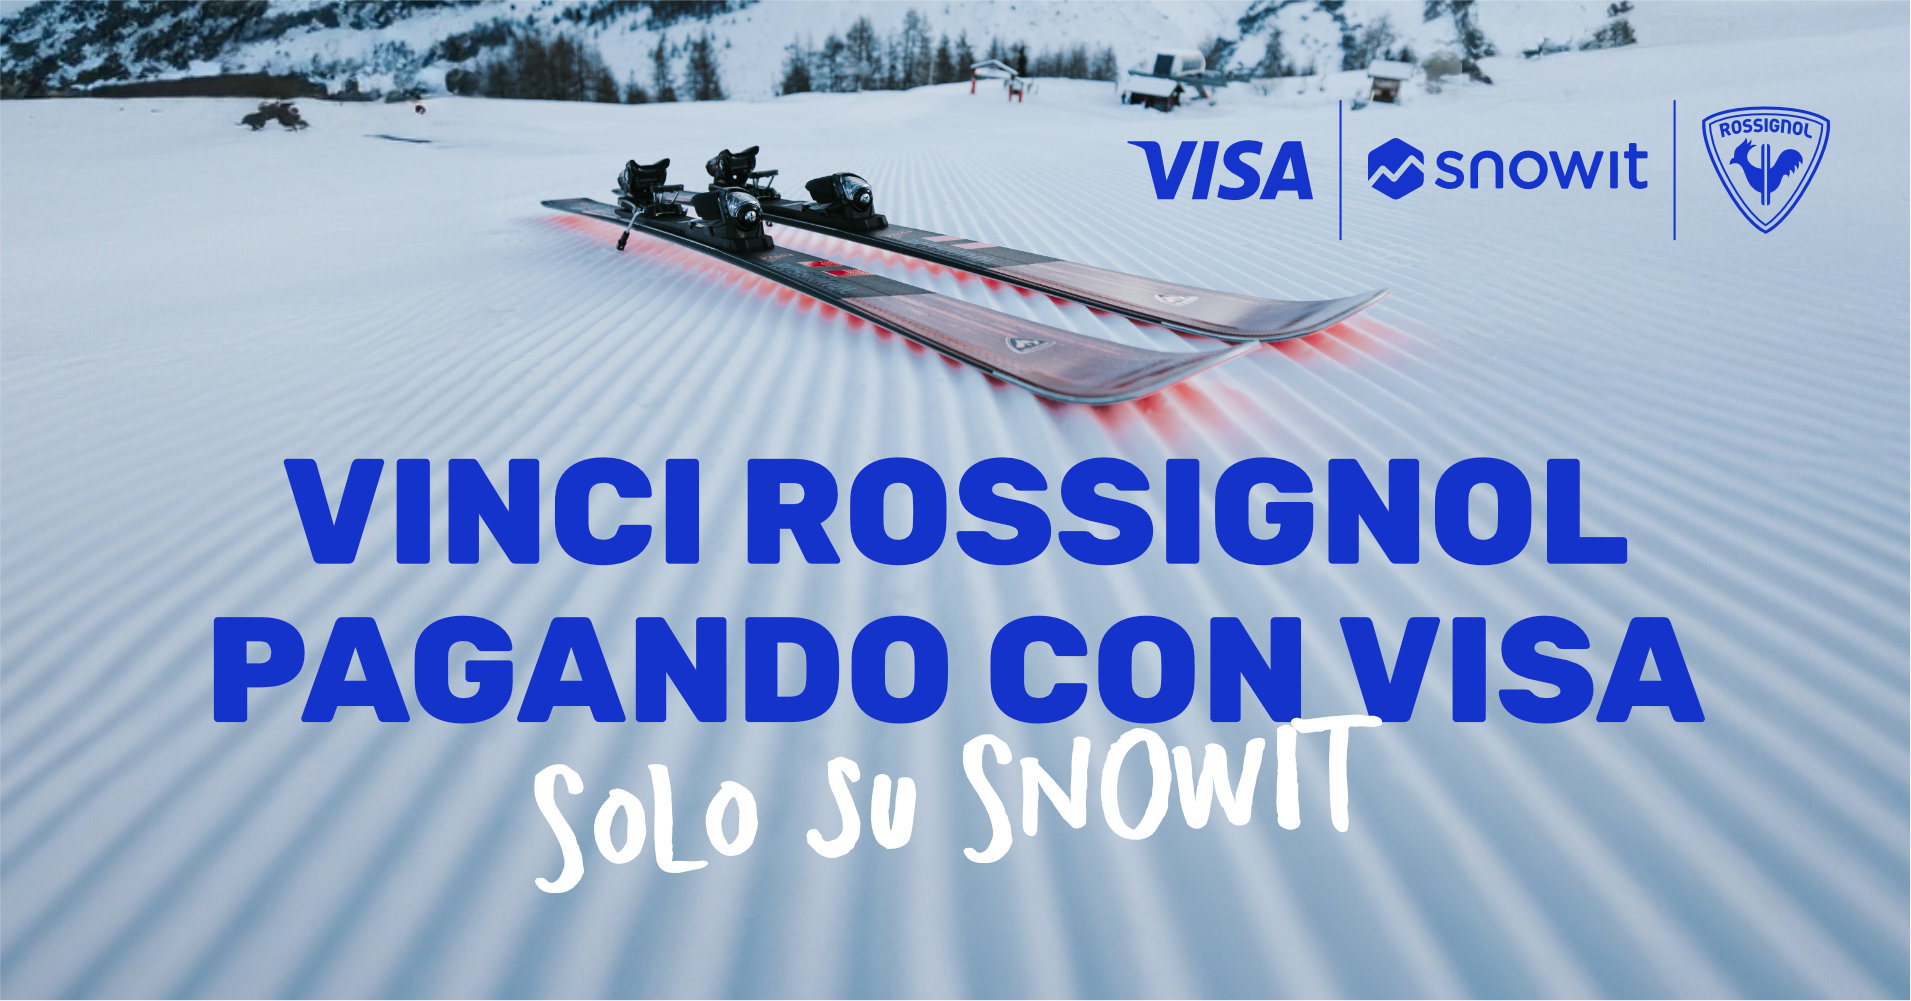 Pay with Visa: 15% discount for you • Snowit